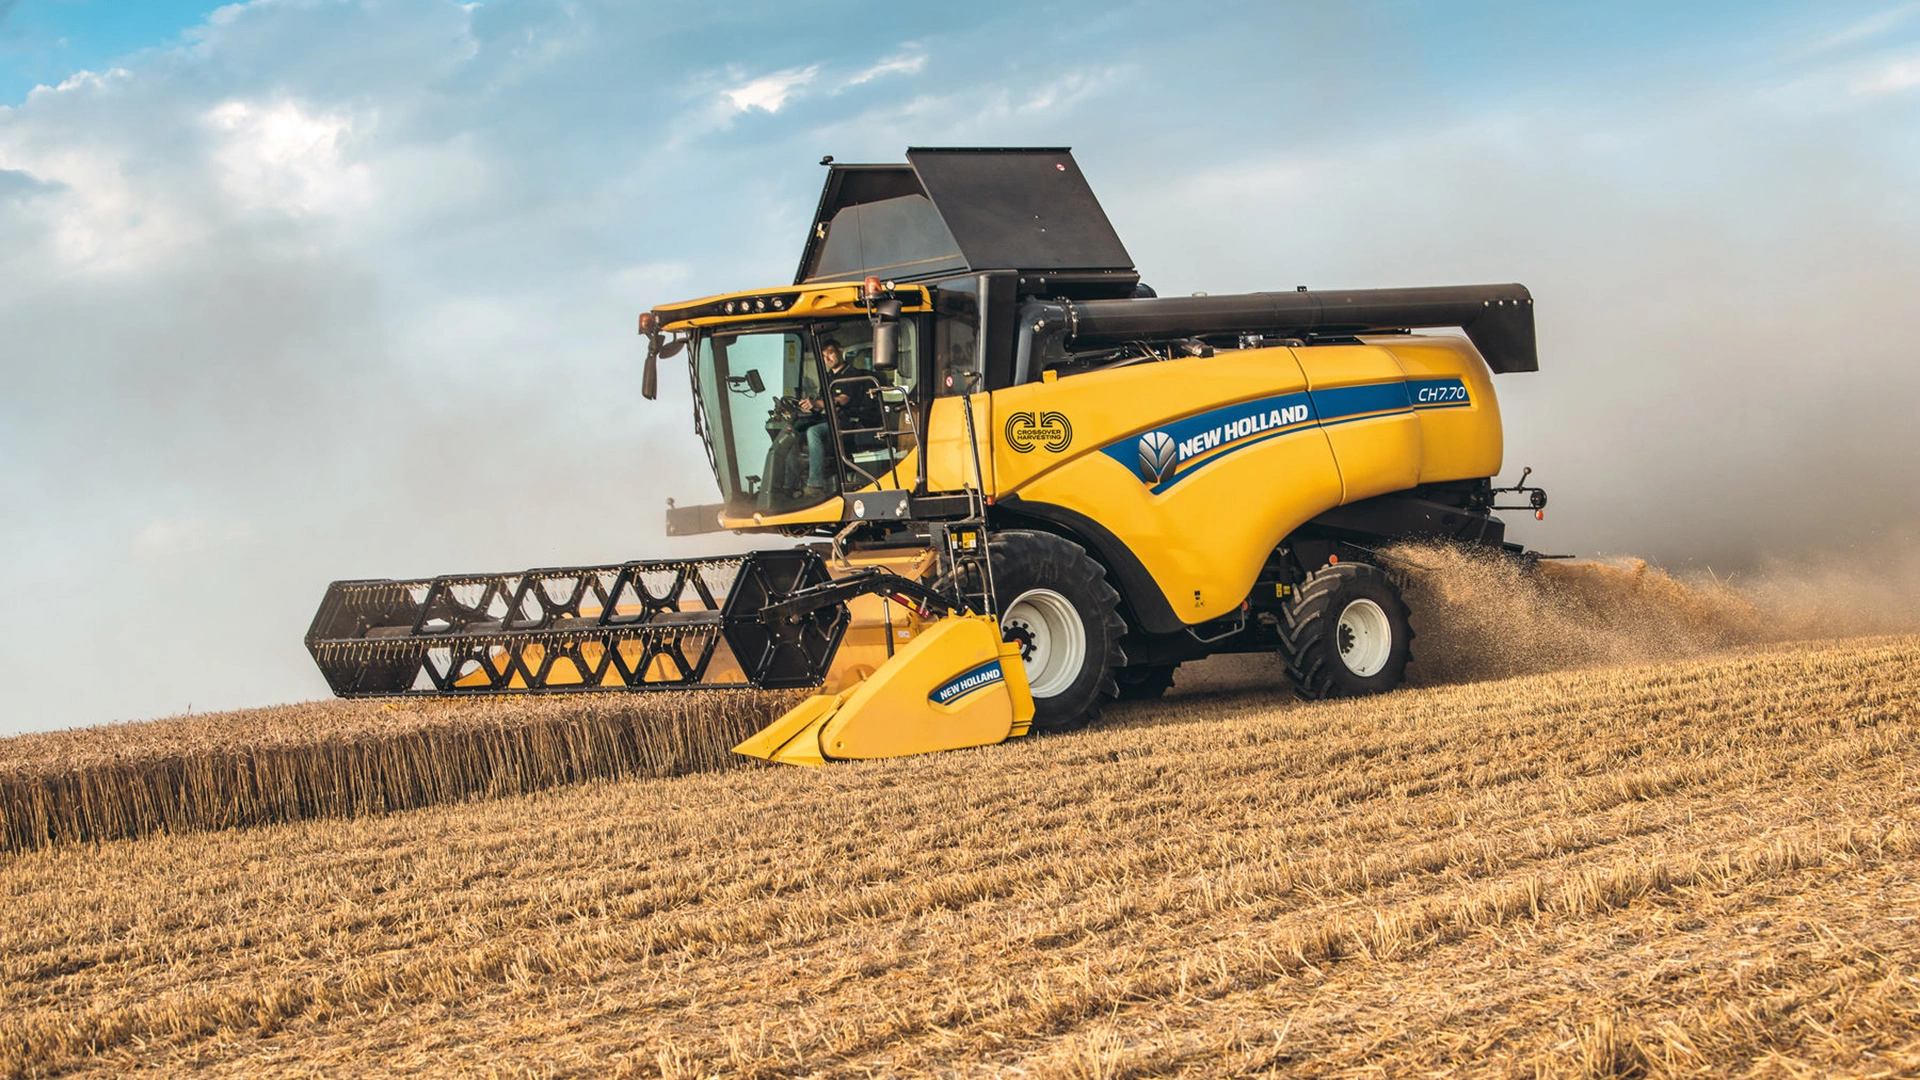 New Holland CH Combine Harvester in action, efficiently harvesting with agricultural combine header